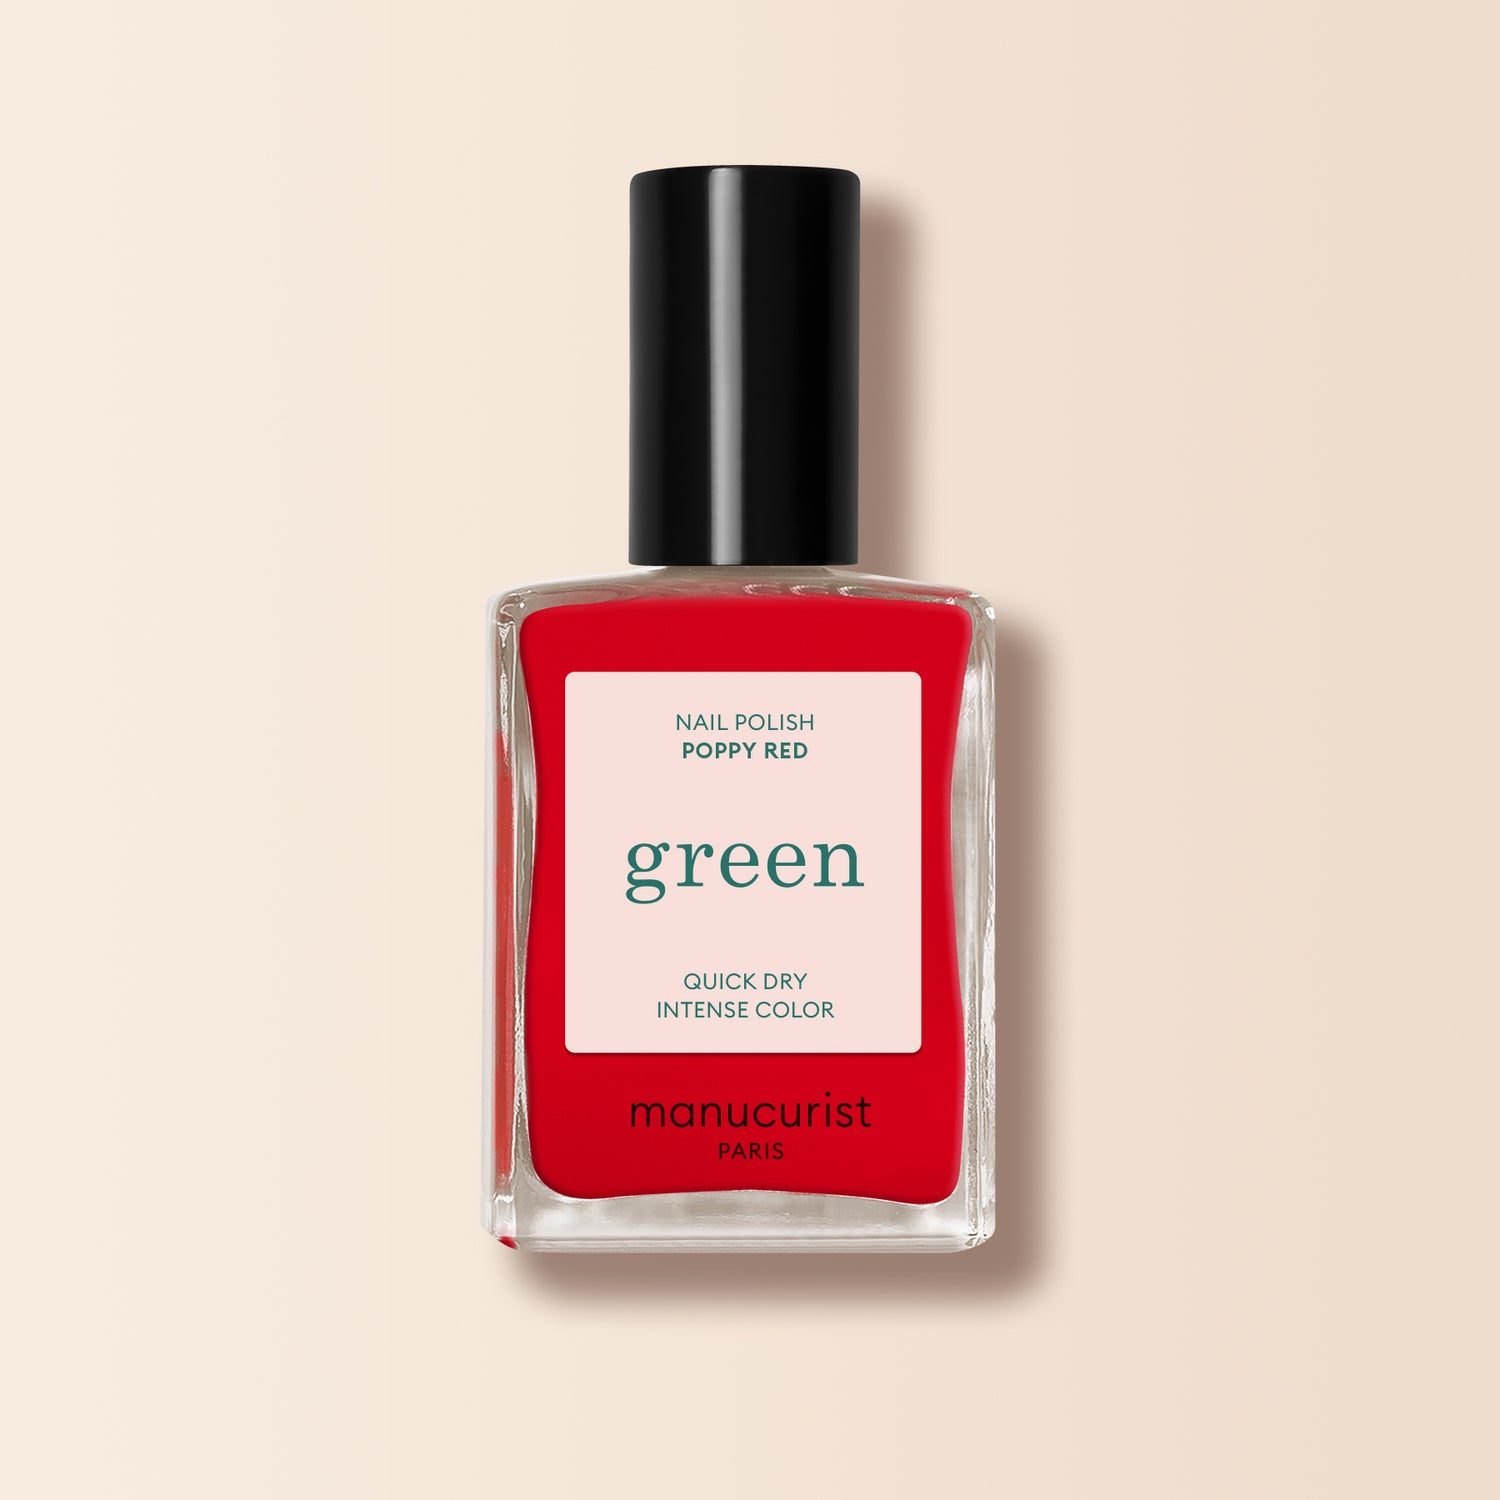 Manucurist Green Natural Nail Color Poppy Red 15 ml .51 fl oz Full Size